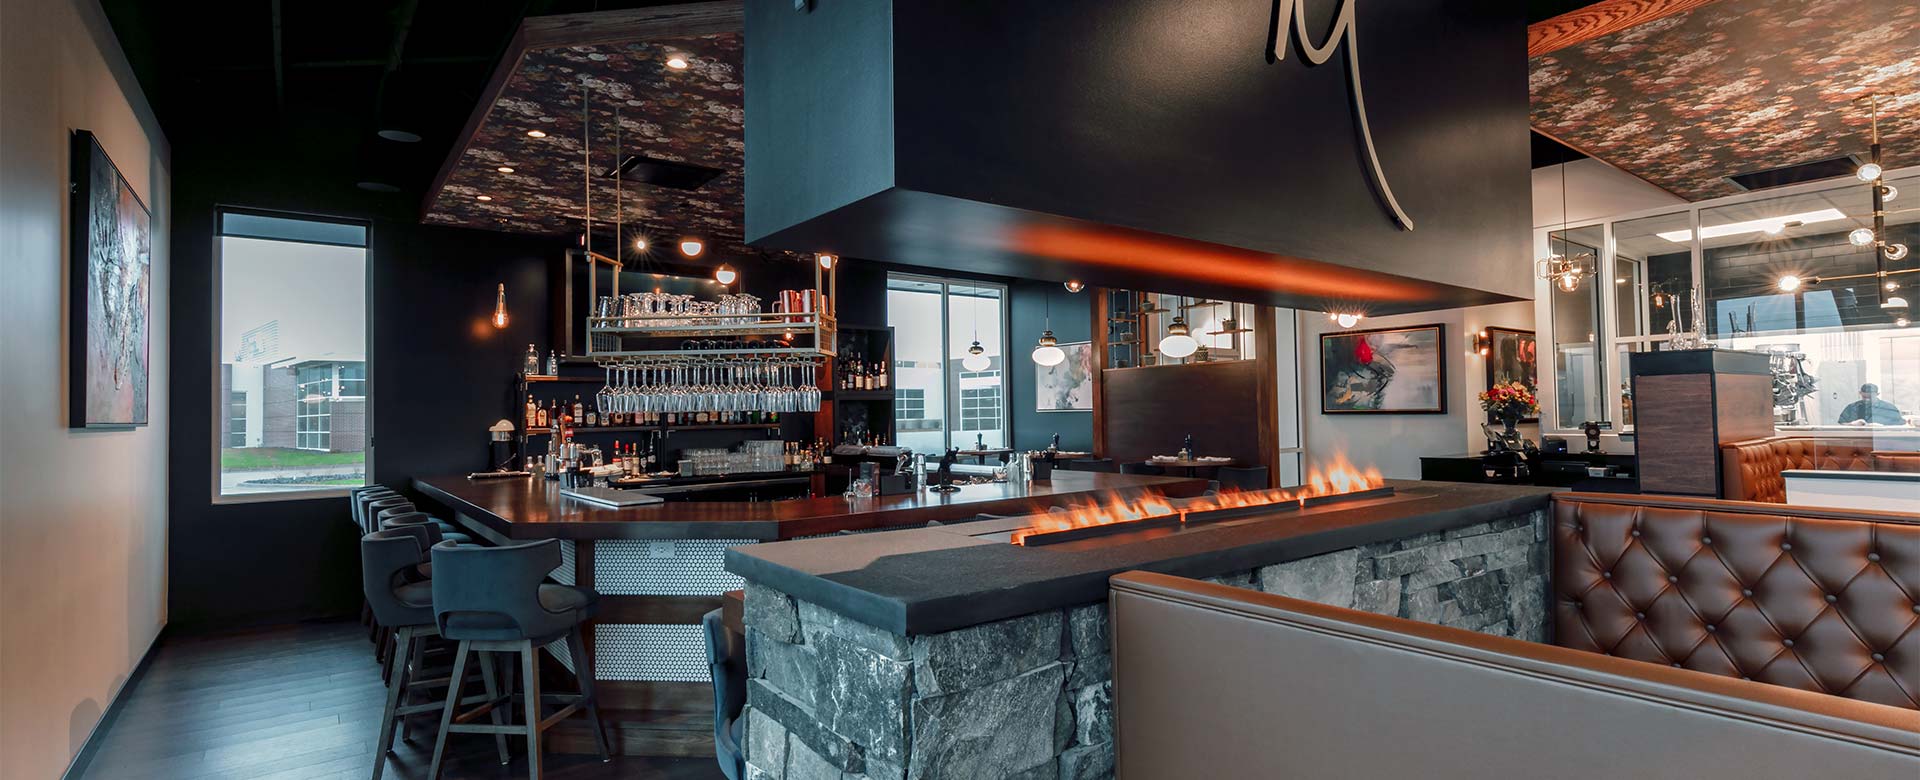 the monarch kitchen and bar